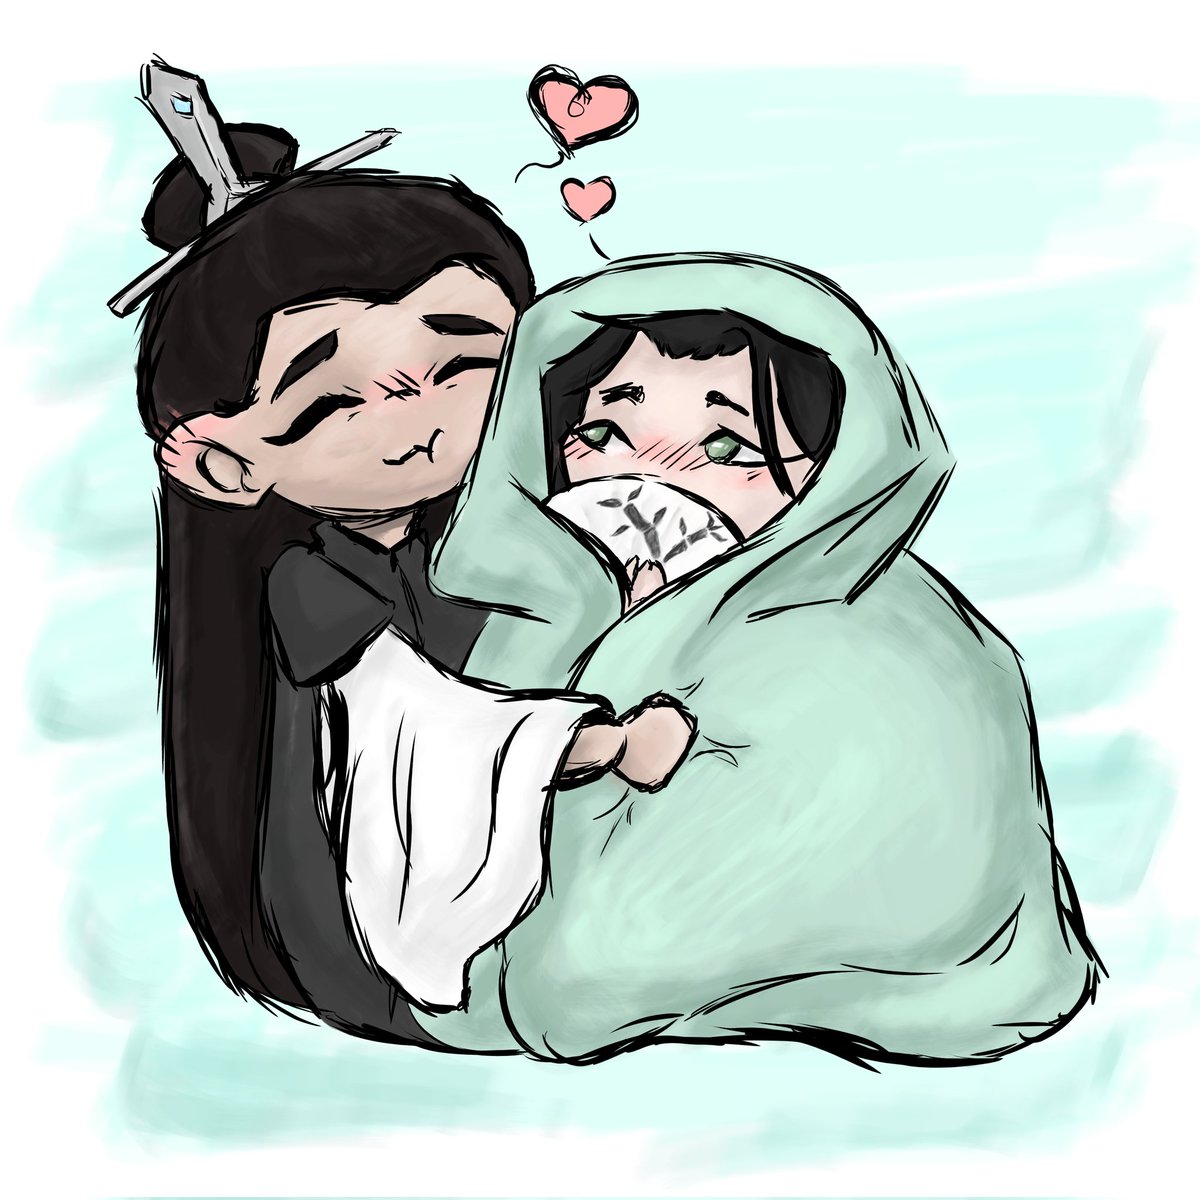 Some Qijiu fanart for the cover of my newest fanfiction (*^-^*)
Made two versions because i only noticed later that it would look rather cute if SJ had his little fan

#svsss #Qijiu #YueQingyuan #ShenJiu #ShenQingqiu